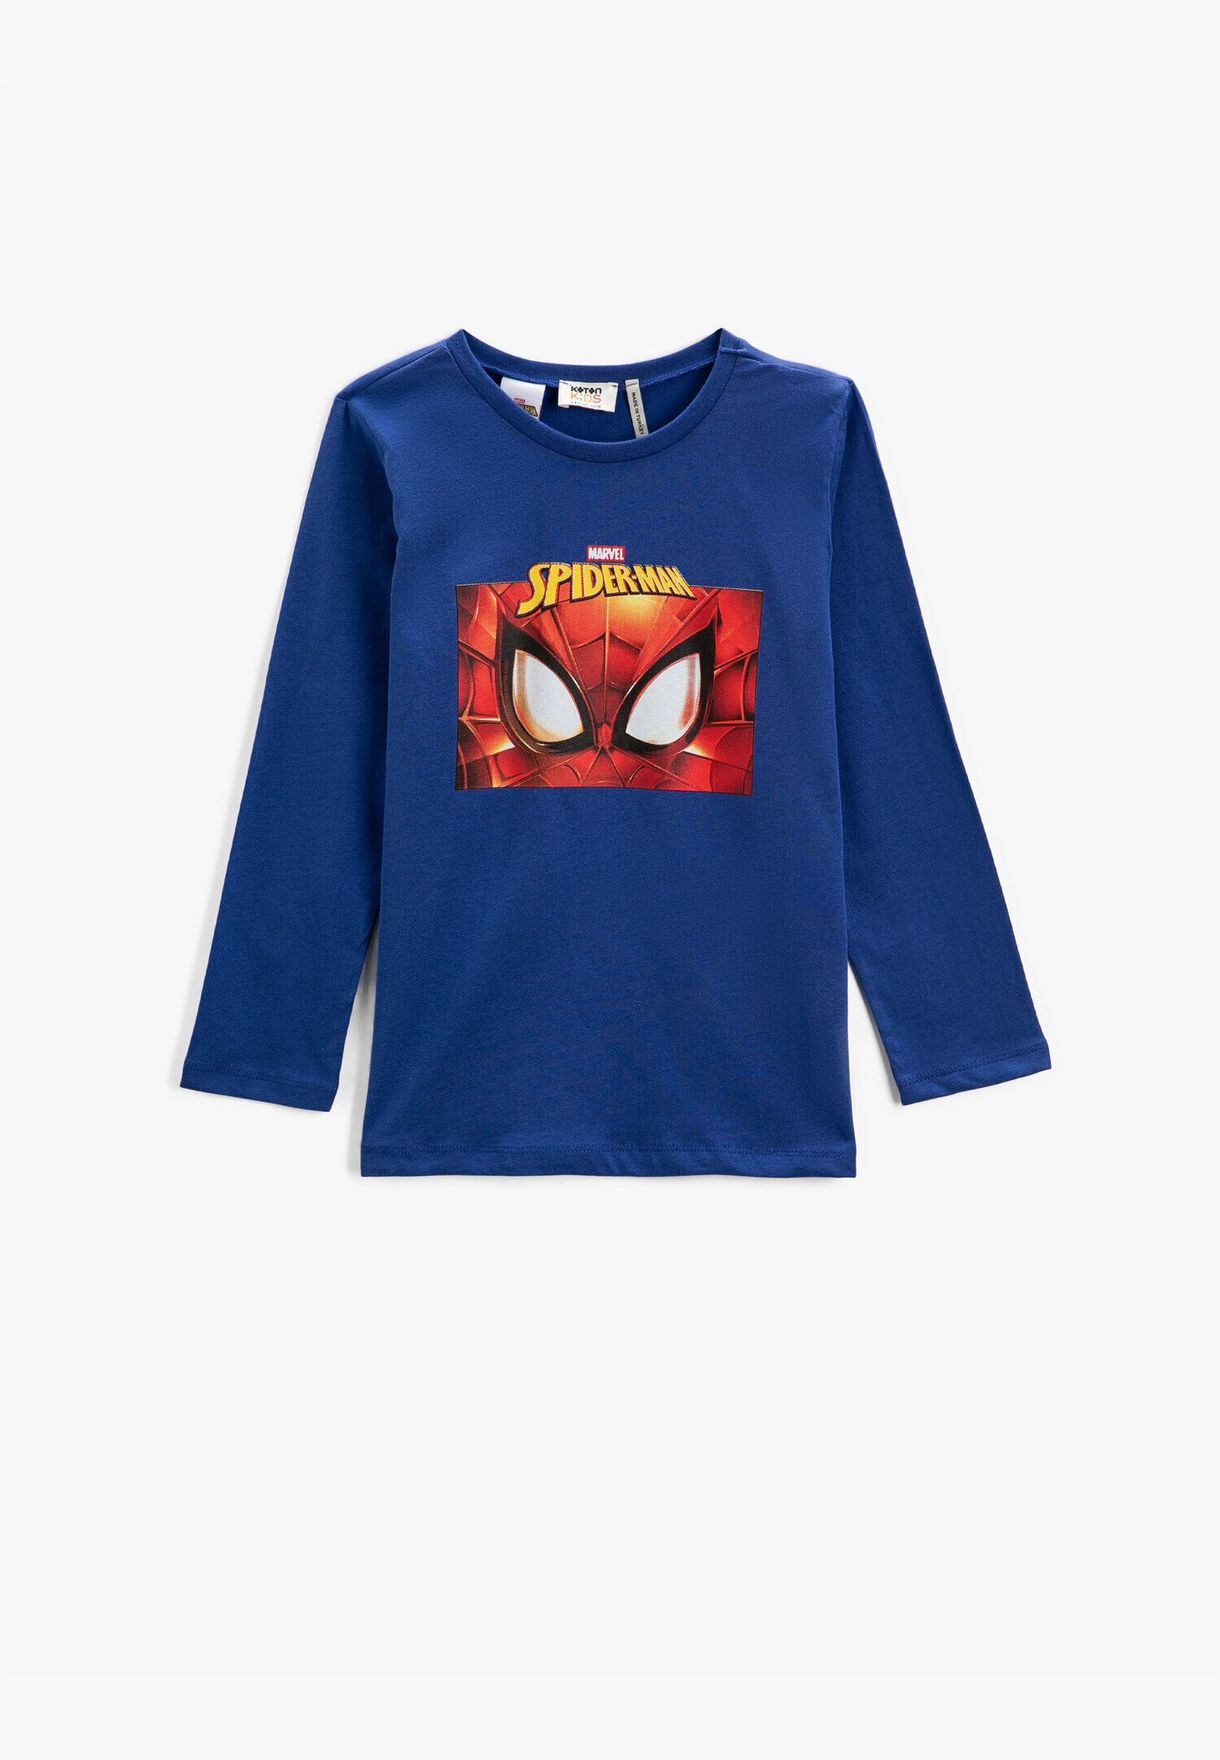 Spiderman Licensed Printed T-Shirt Long Sleeve Cotton